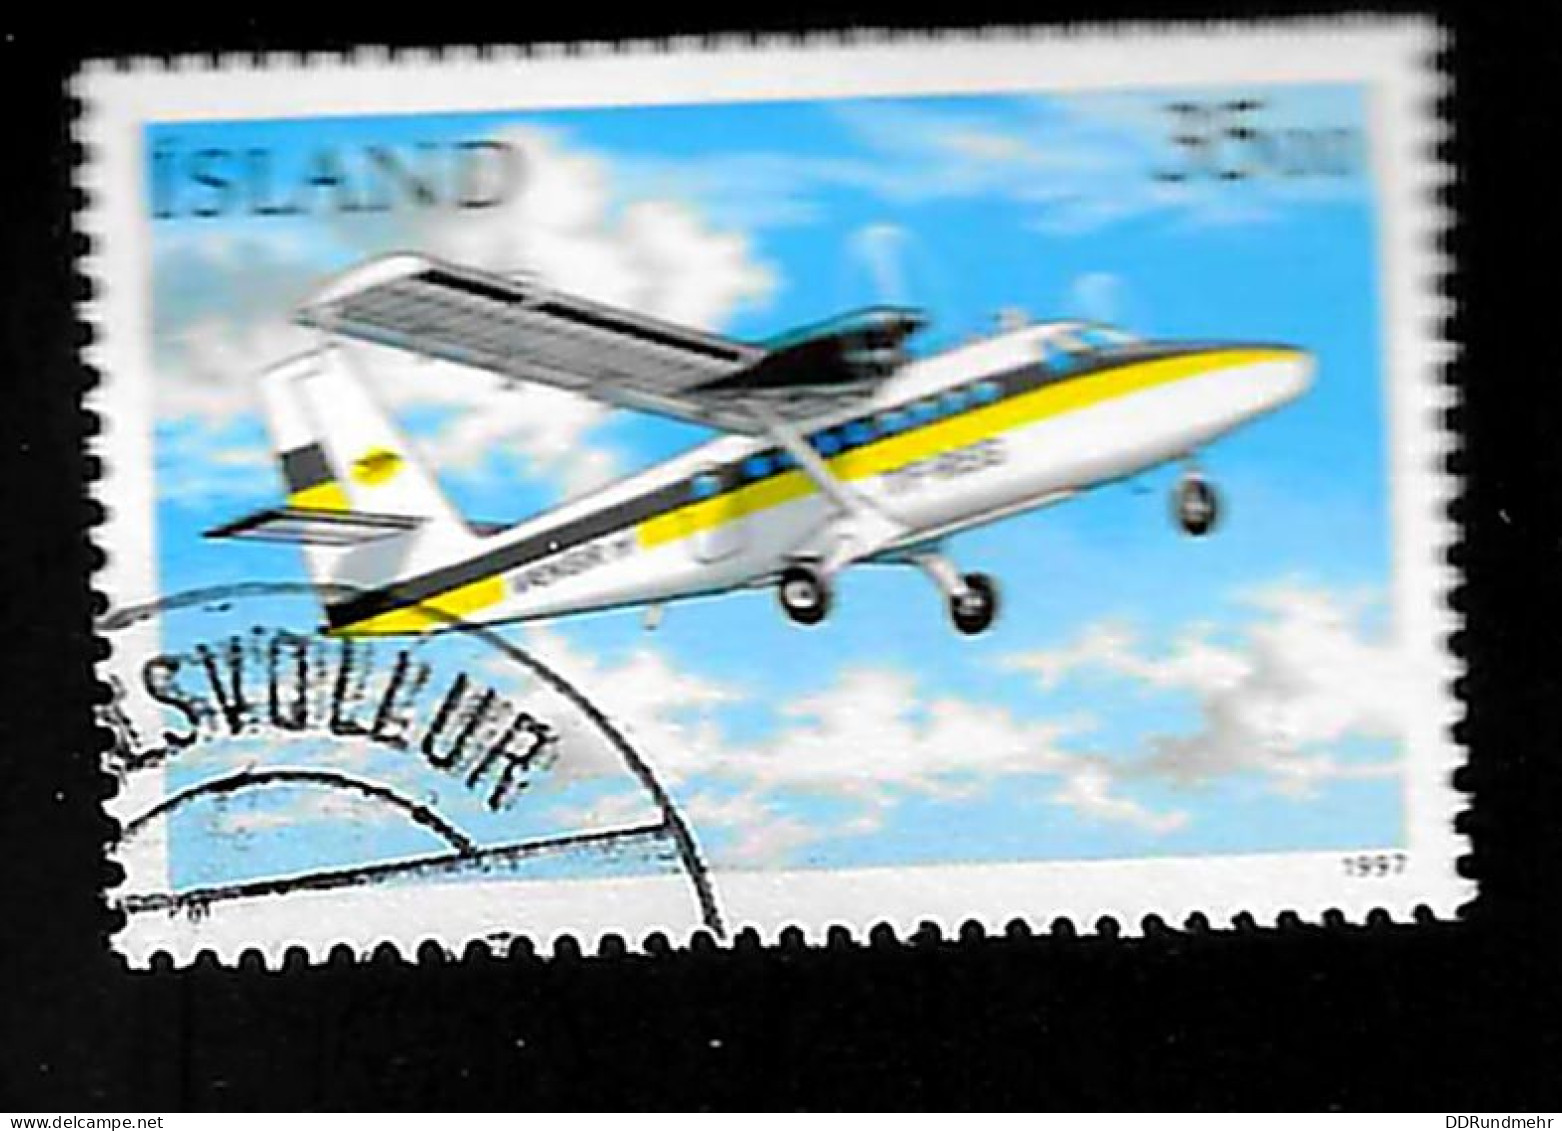 1997 Postal Aircrafts Michel IS 869 Stamp Number IS 841 Stanley Gibbons IS 882 AFA IS 854 Used - Gebruikt